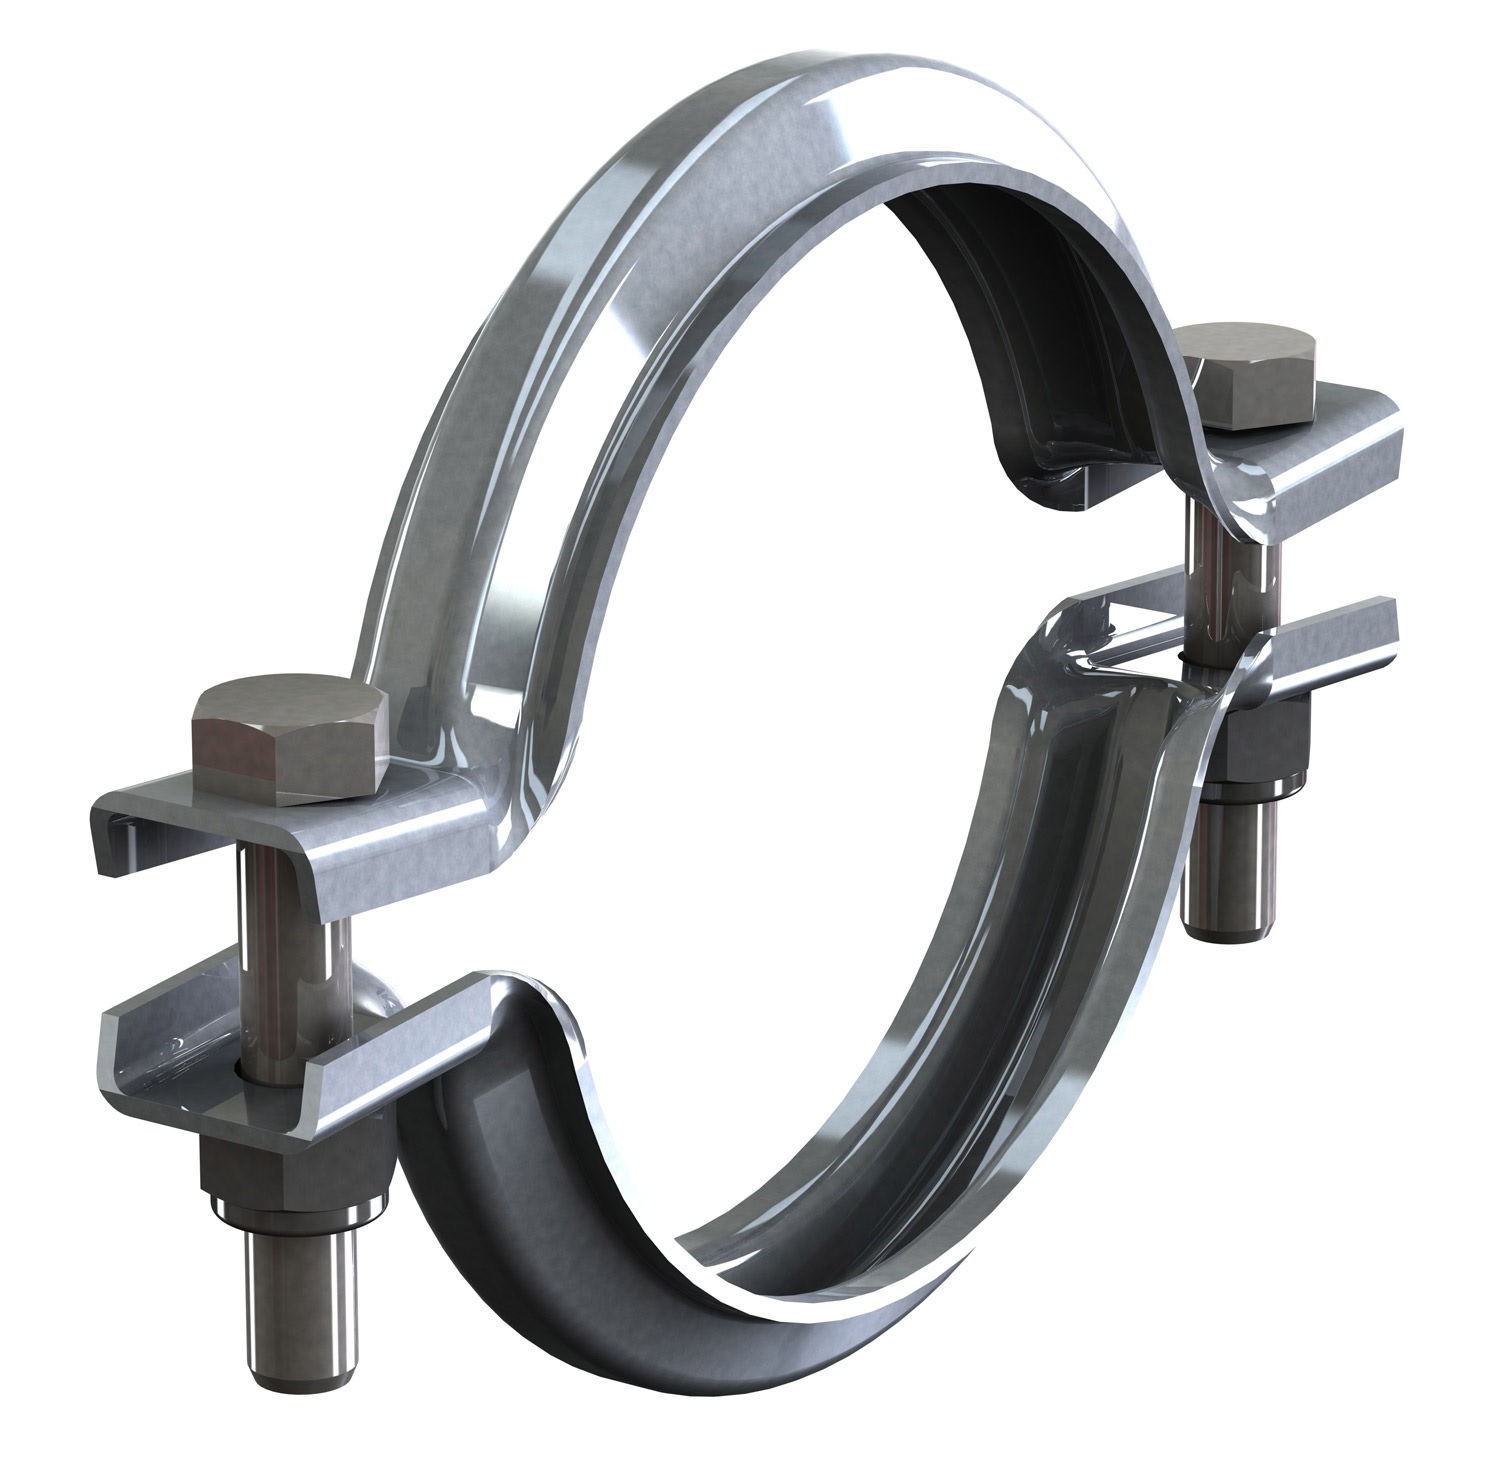 V-band Clamps | NORMA Americas Distribution Services